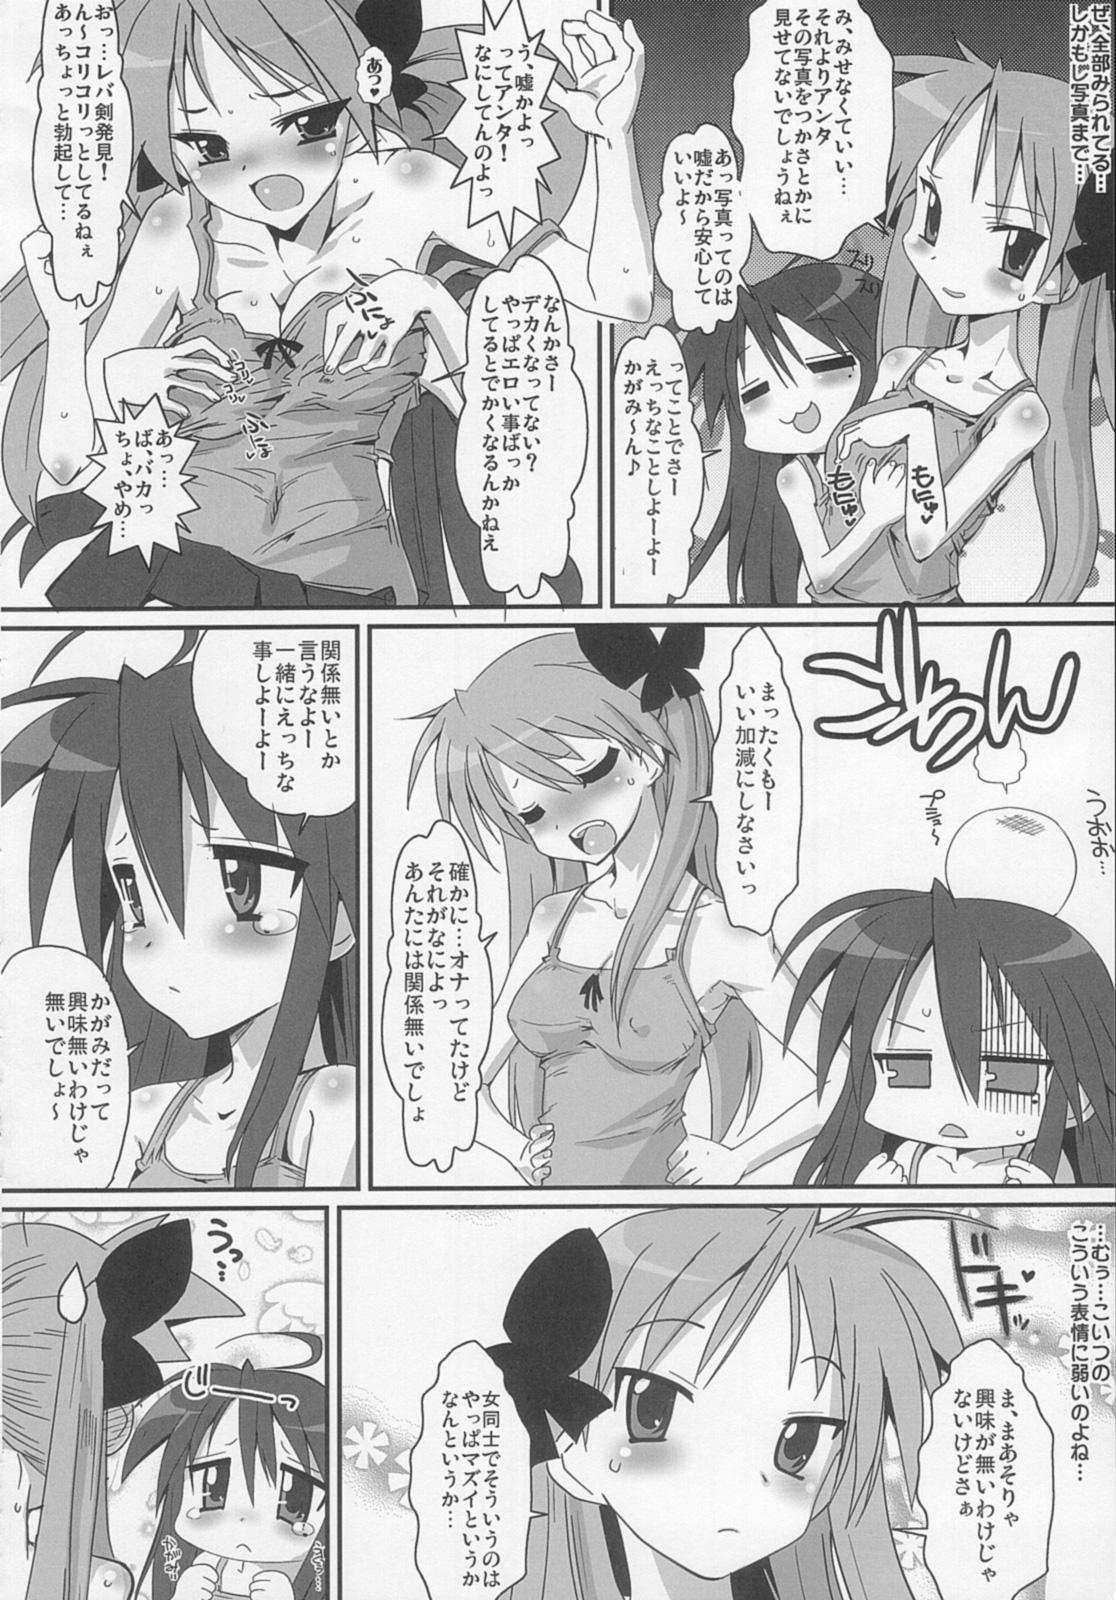 Gapes Gaping Asshole Ai dayo Kagamin - Lucky star Skinny - Page 7